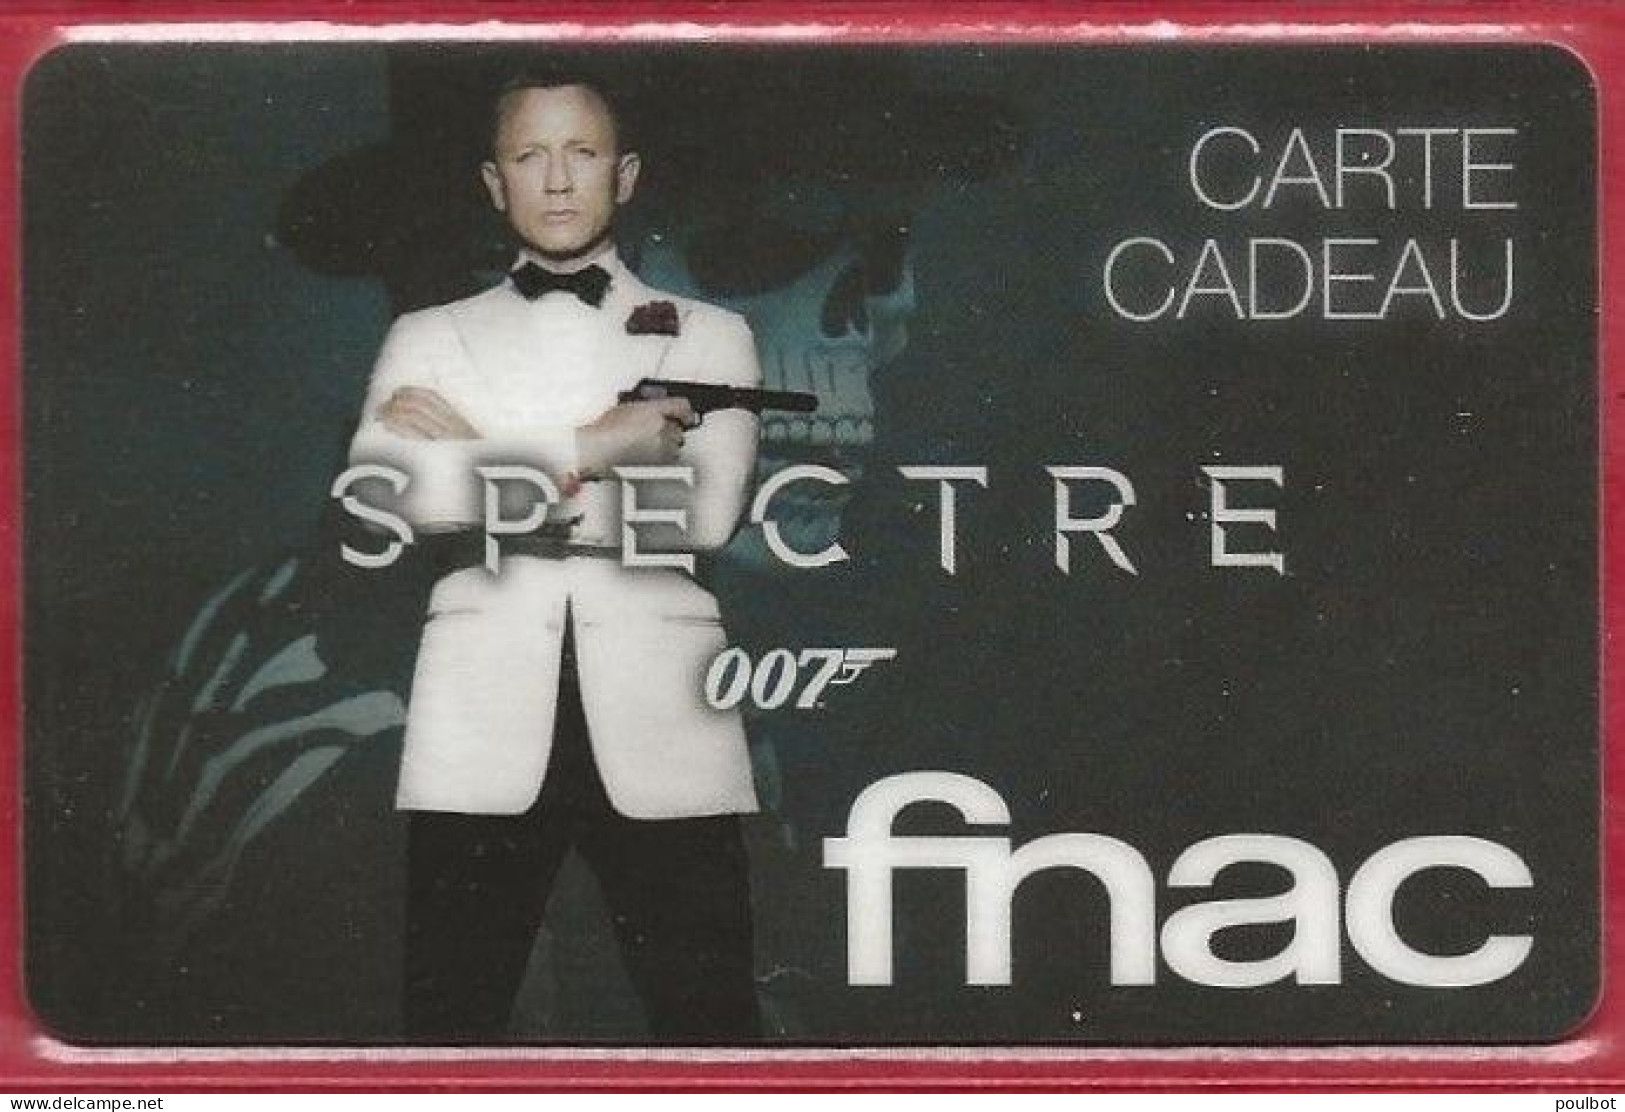 Carte Cadeau FNAC  Spectre 007 - Gift And Loyalty Cards